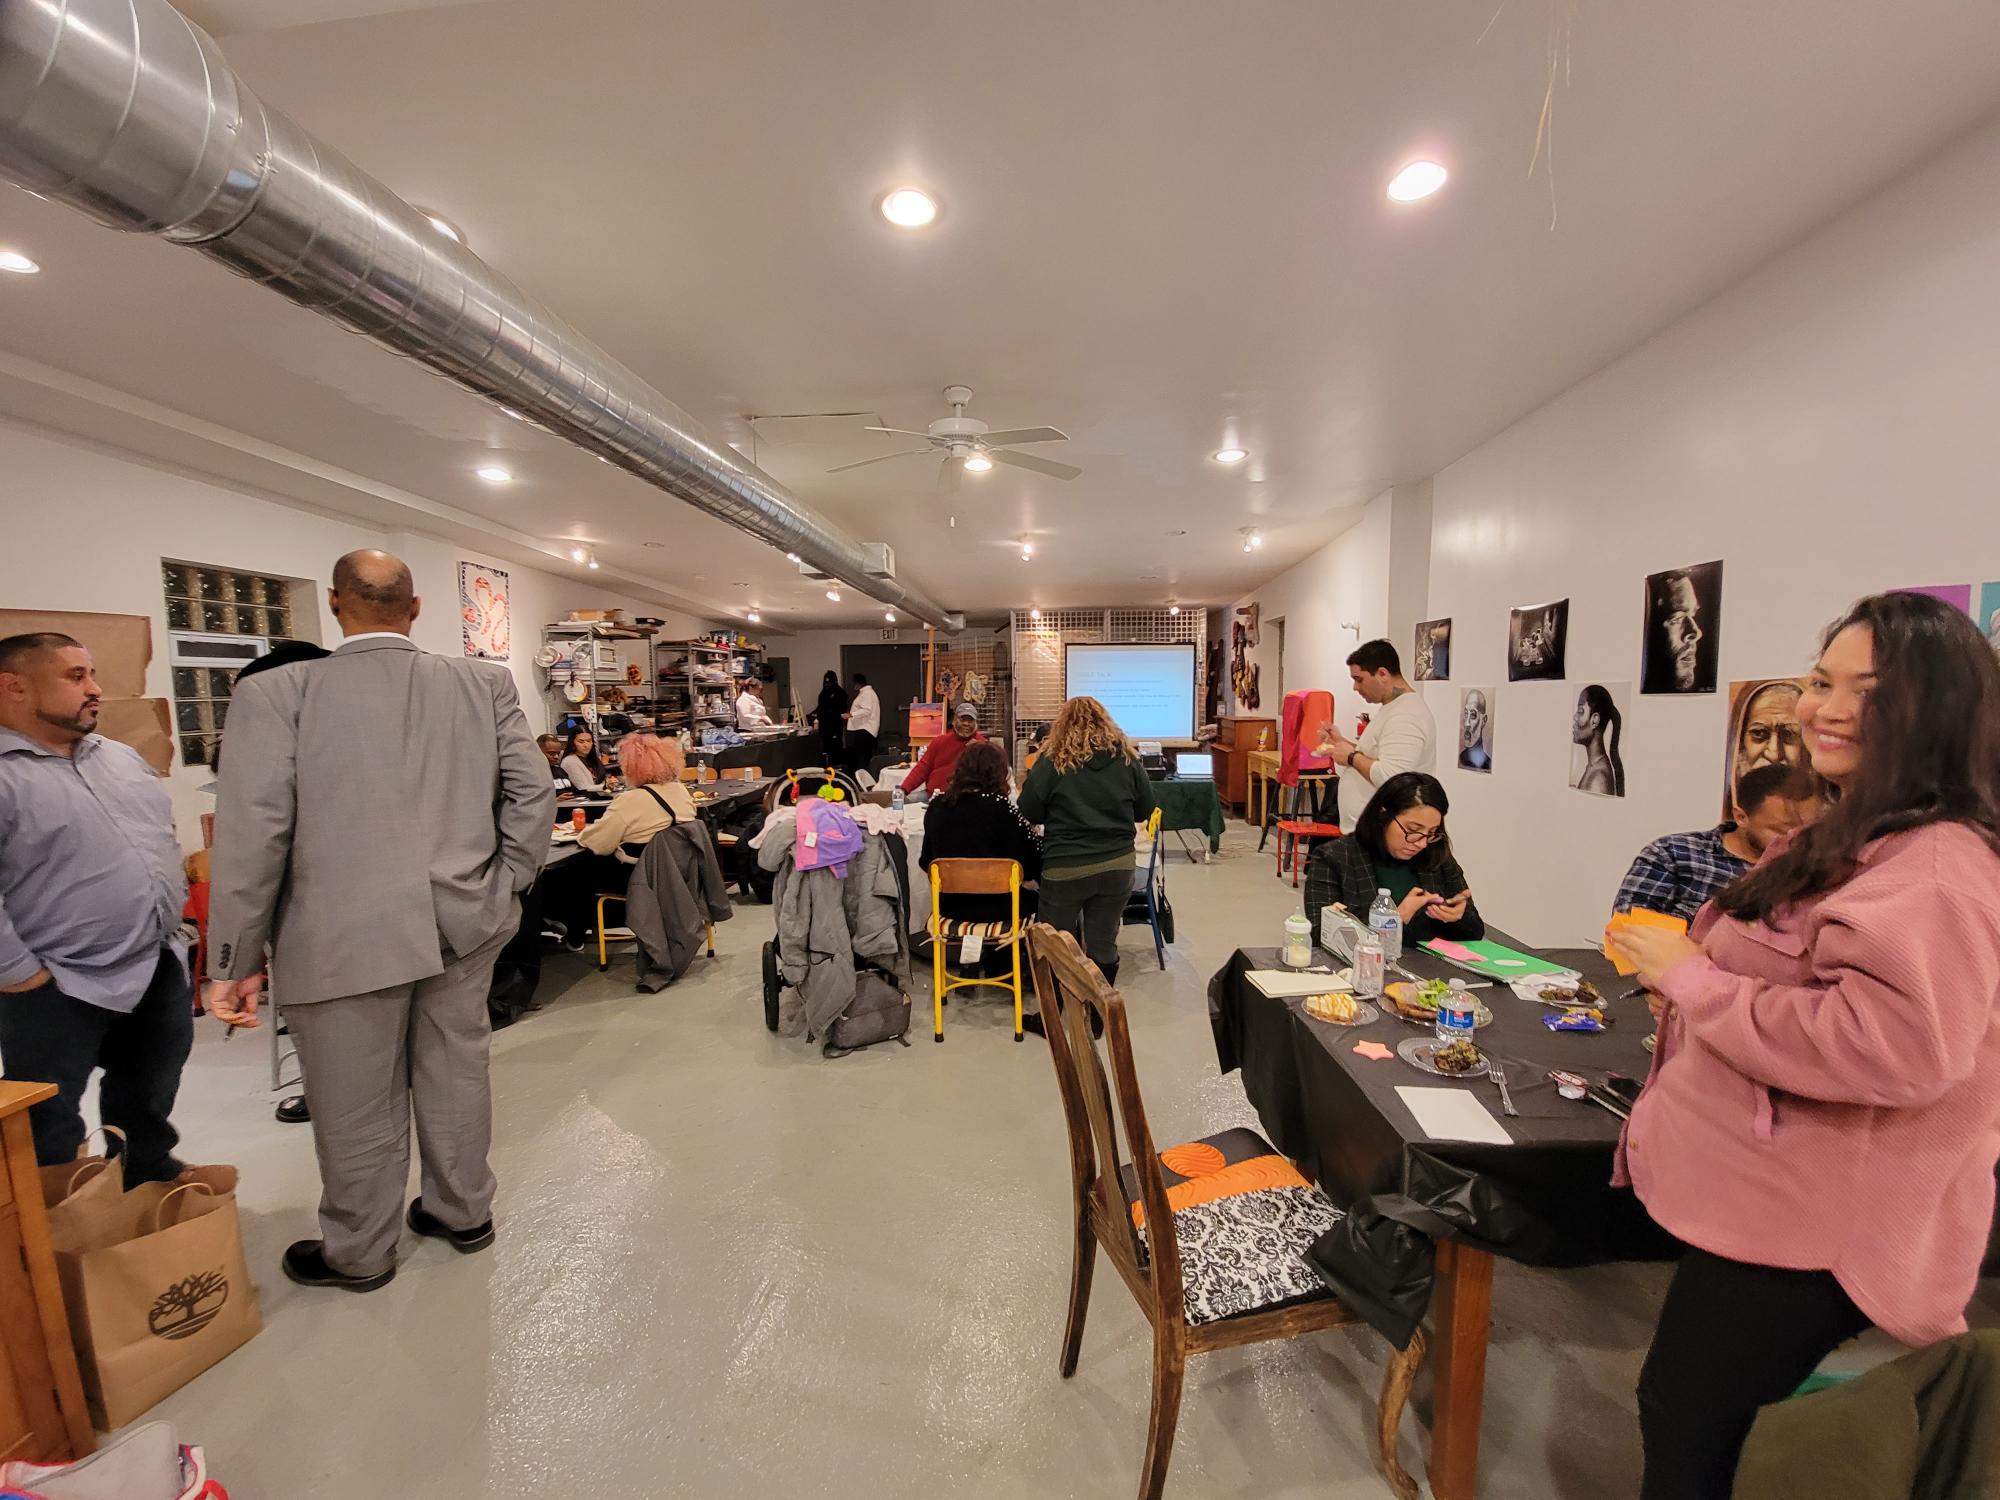 People of many ages and ethnicities gather in a multi-use art and craft space. A person close to the camera smiles while hoding a stack of sticky notes